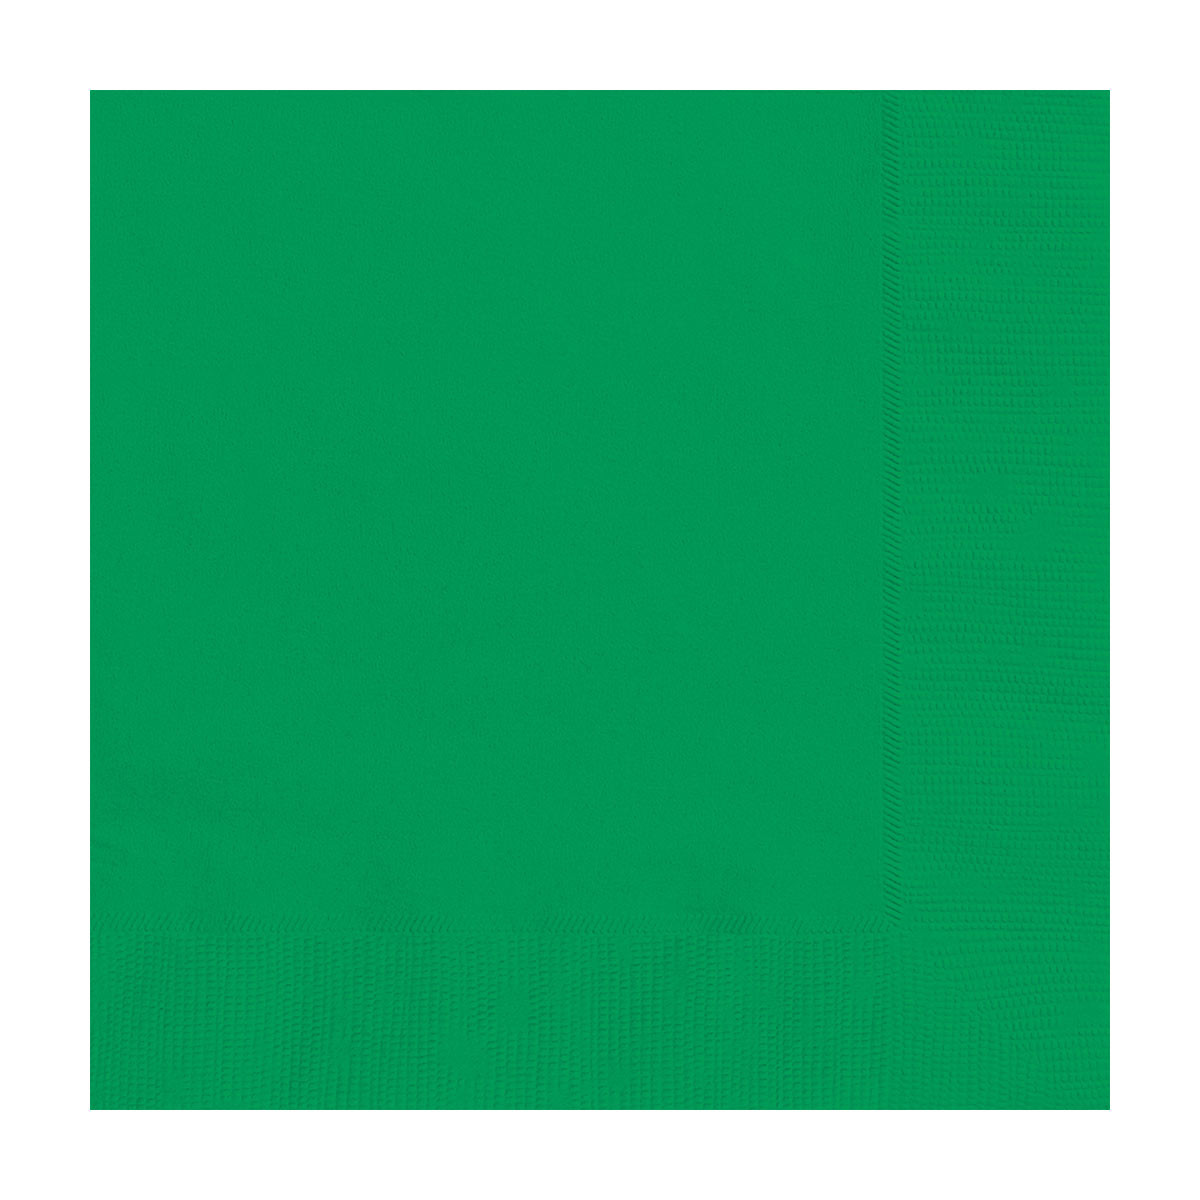 321 Party! Emerald Green Luncheon Napkins, 20 ct